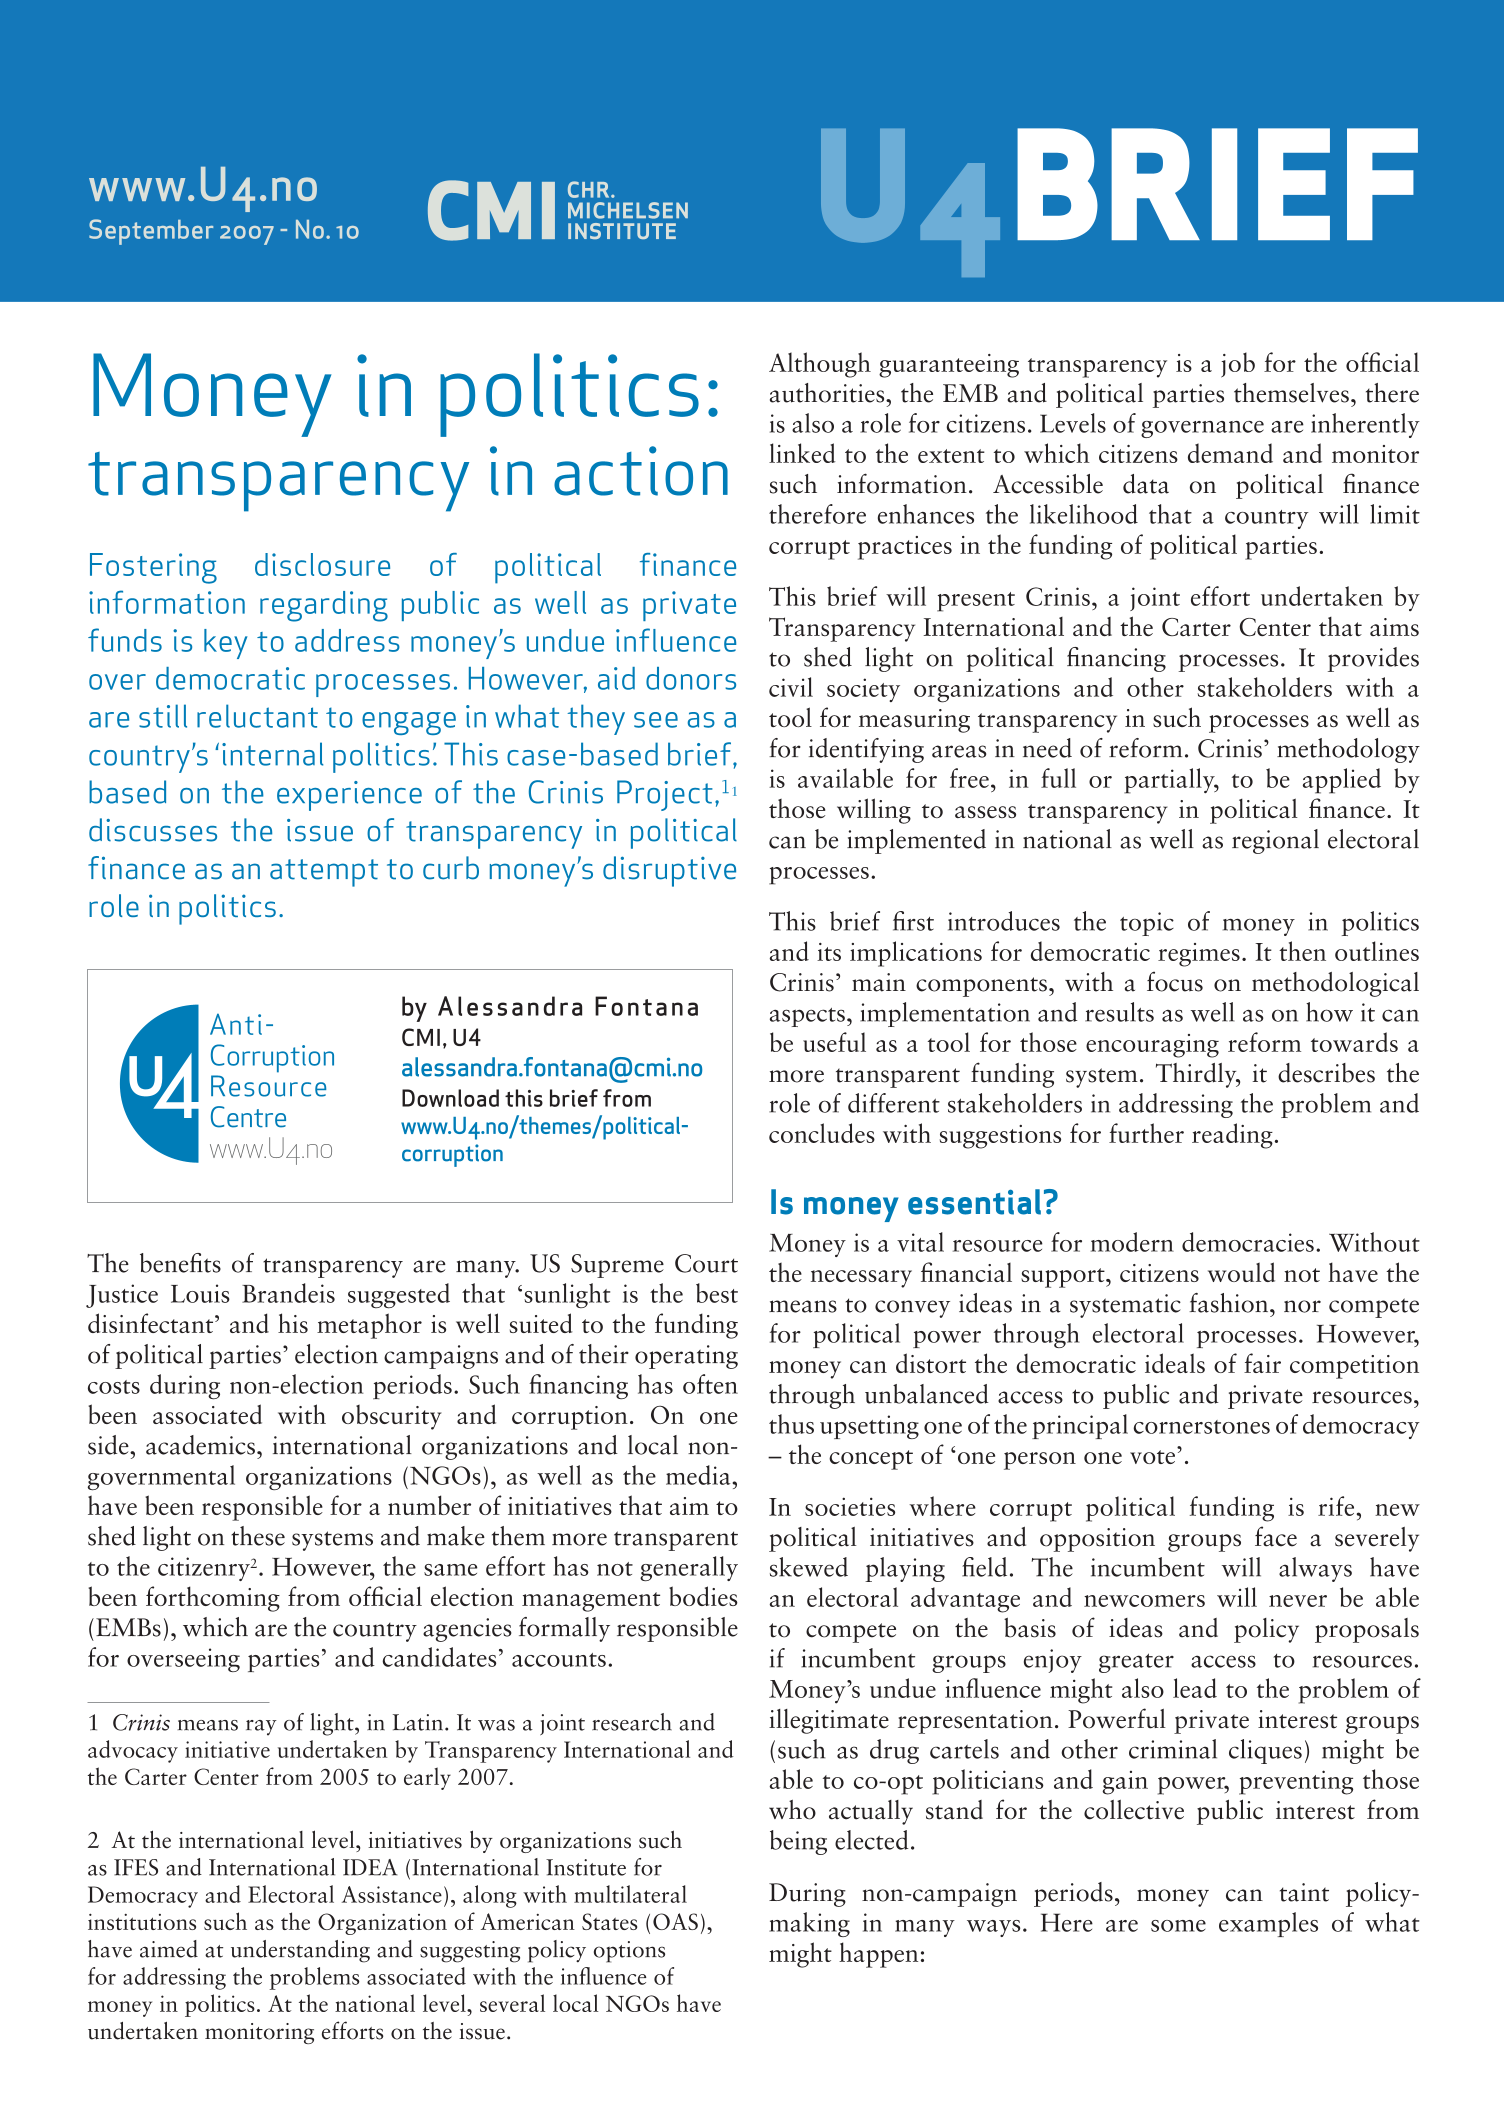 Money in politics: Transparency in action